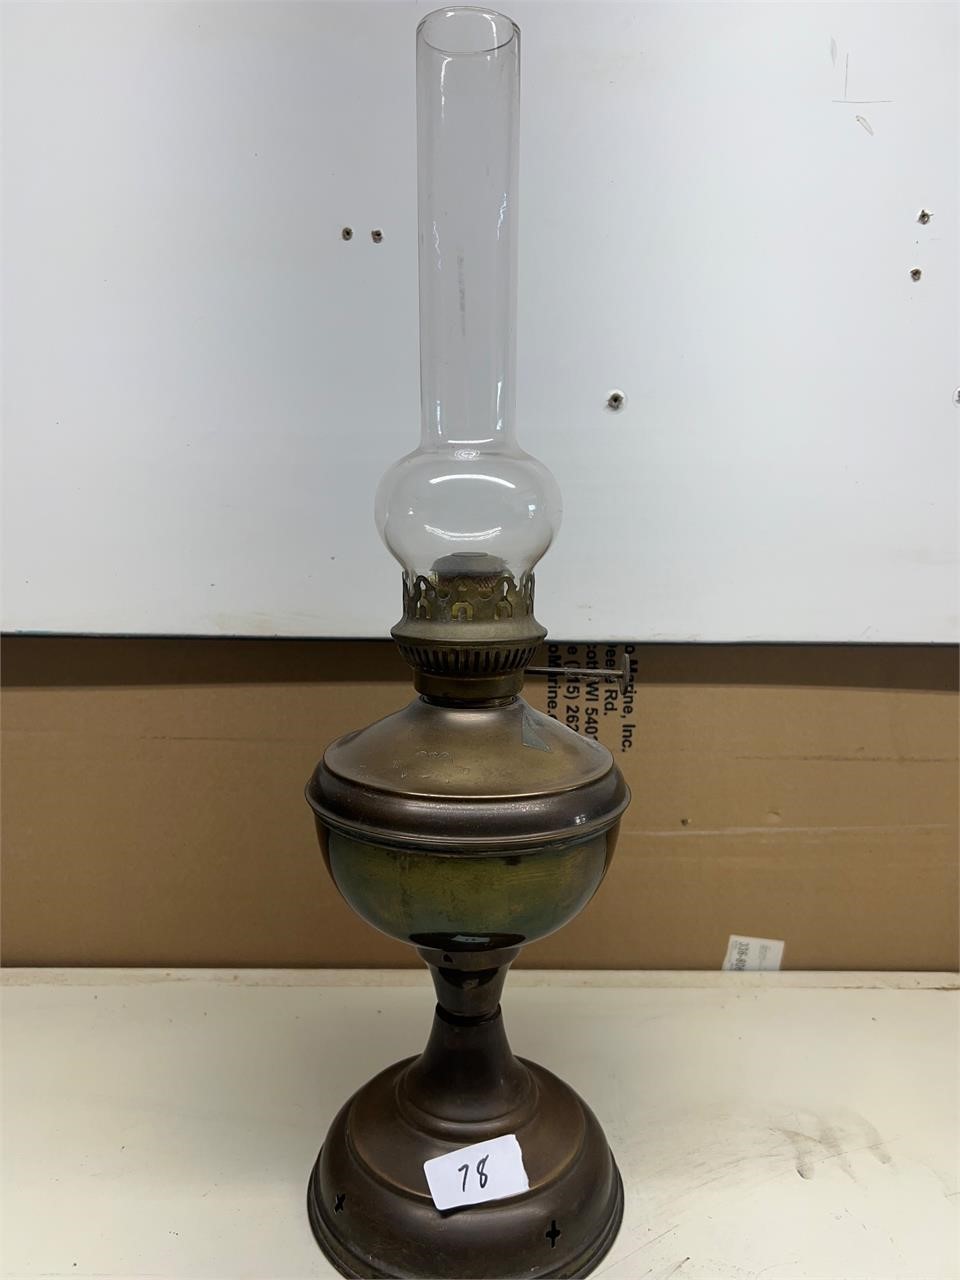 FURNITURE, LAMPS, DISHES & MUCH MORE AUCTION EMORY, TX